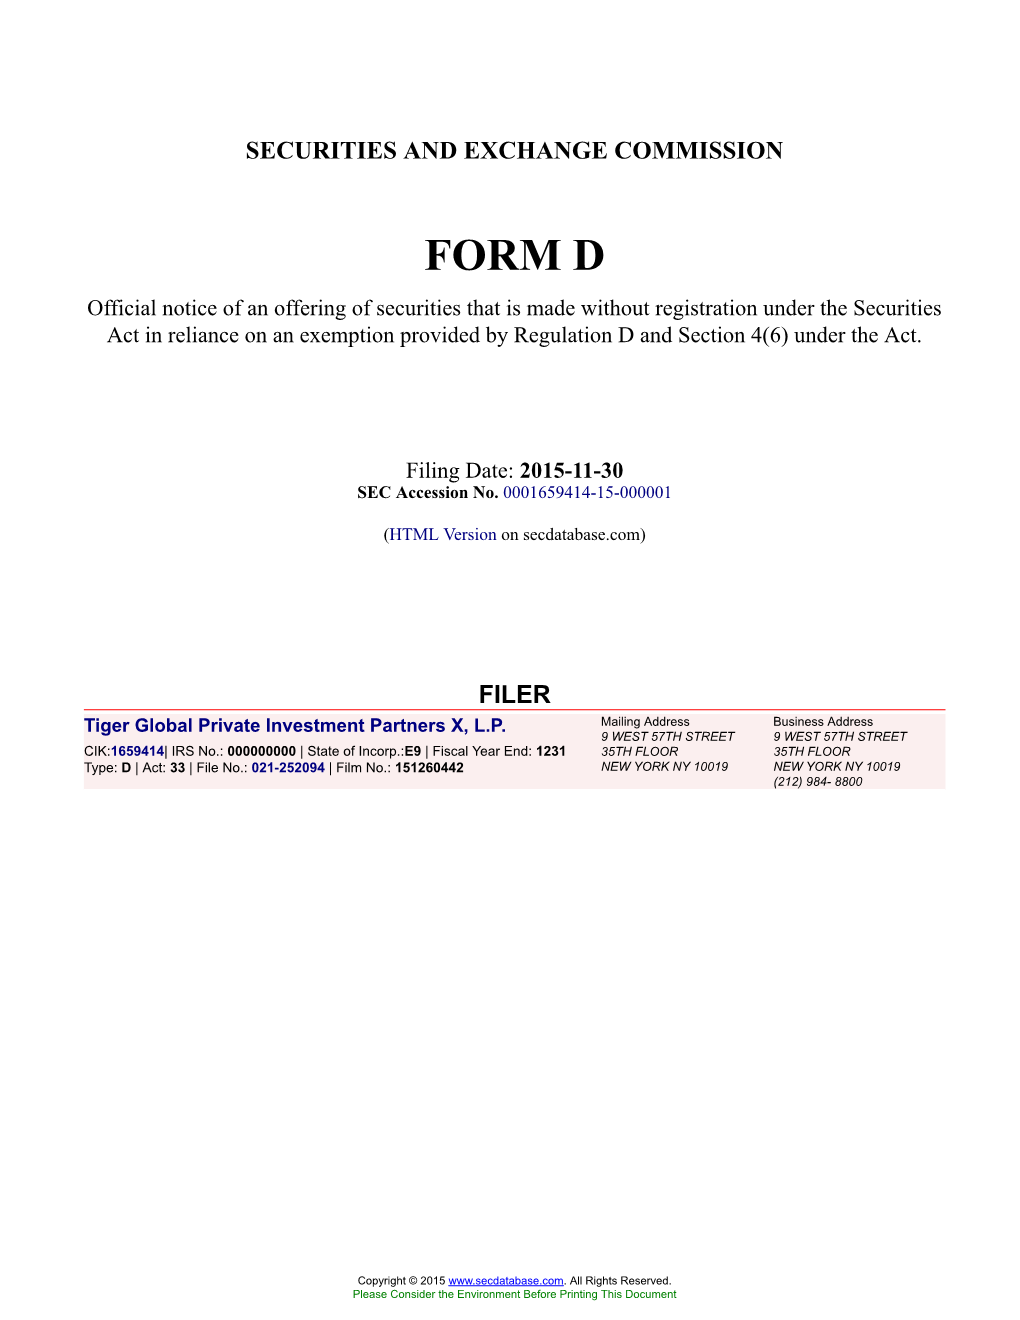 Tiger Global Private Investment Partners X, L.P. Form D Filed 2015-11-30